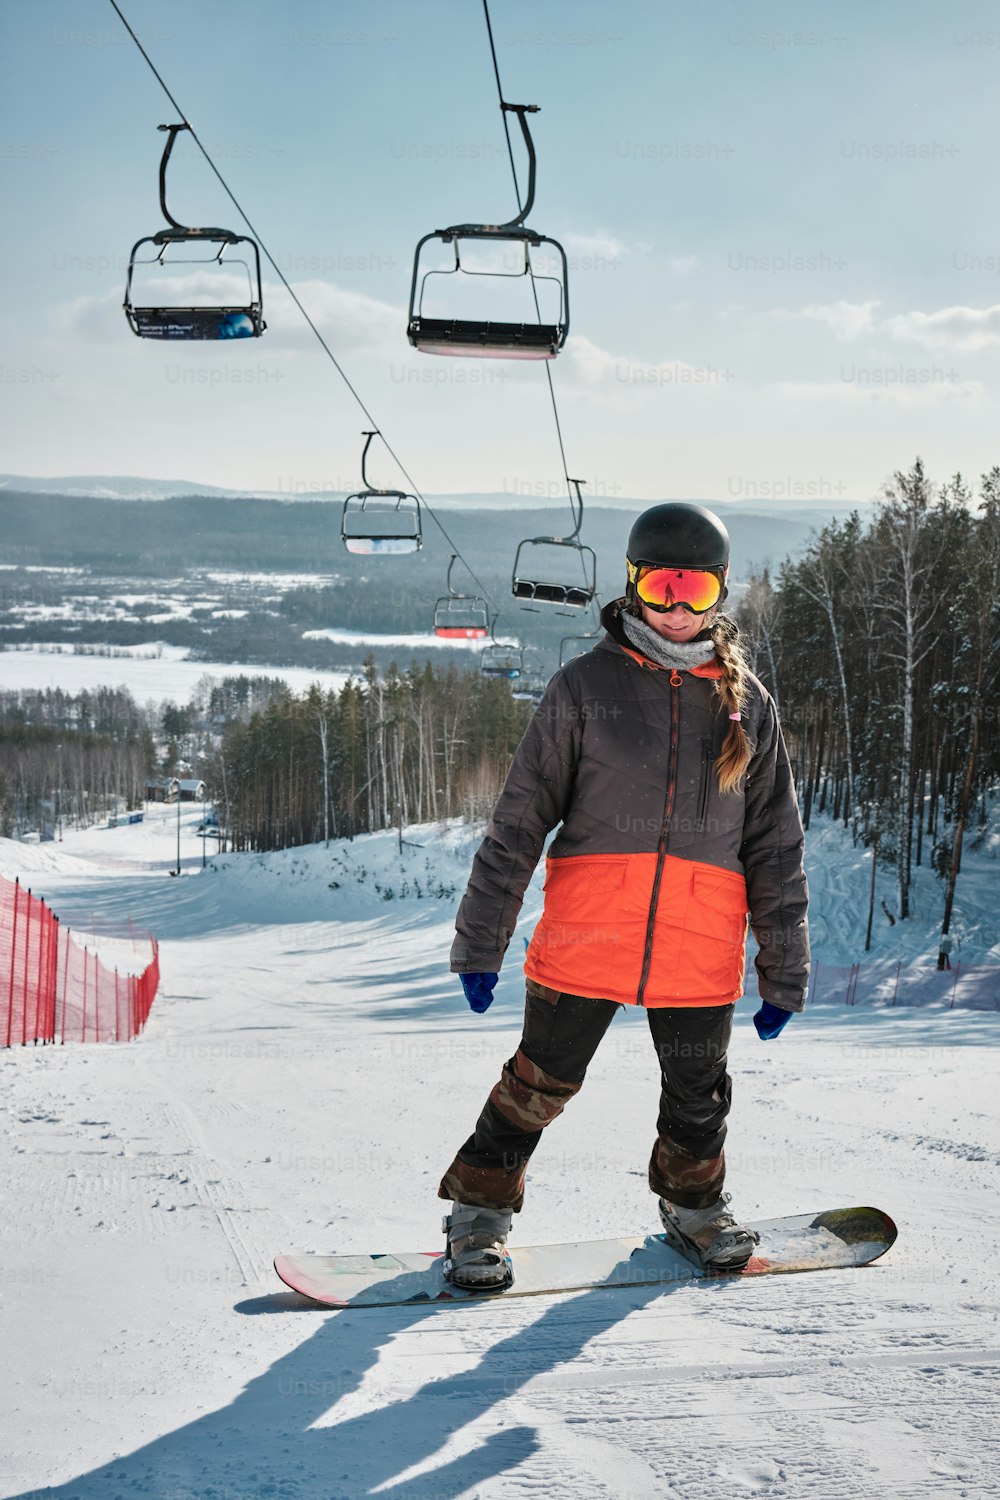 a person riding a snowboard on a snowy surface